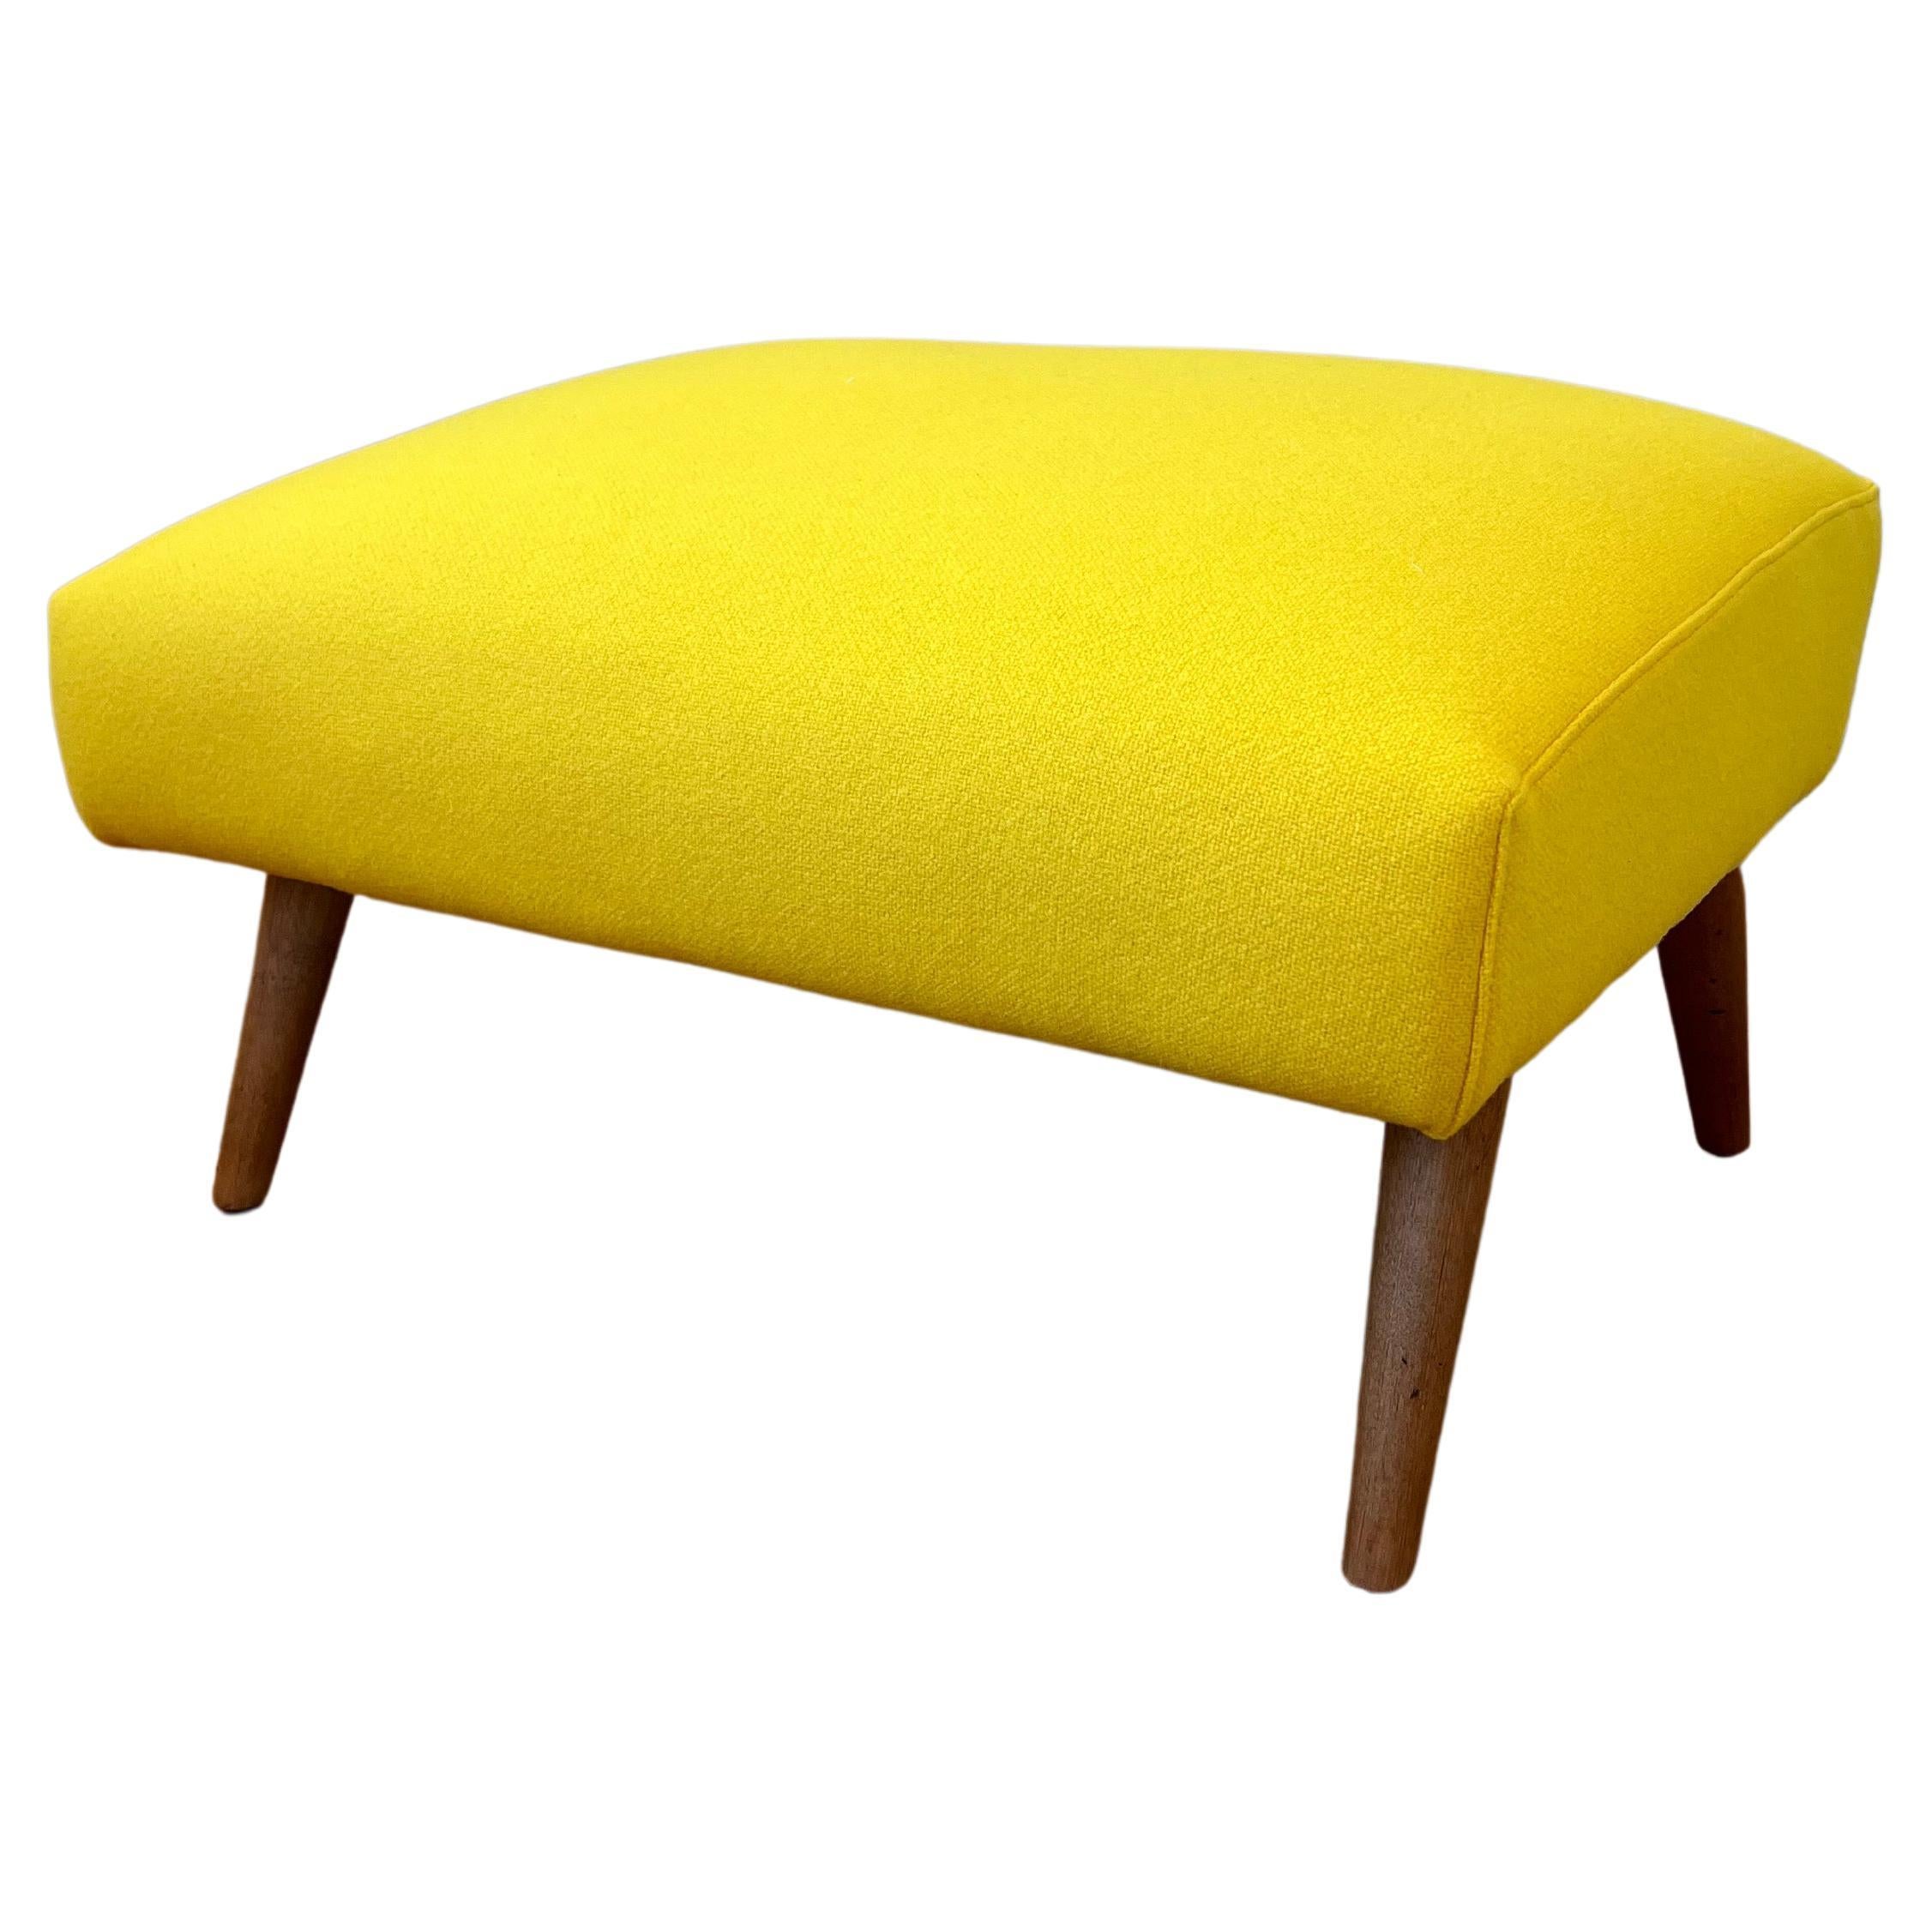 American Mid-Century Modern Ottoman in the Style of Russel Wright